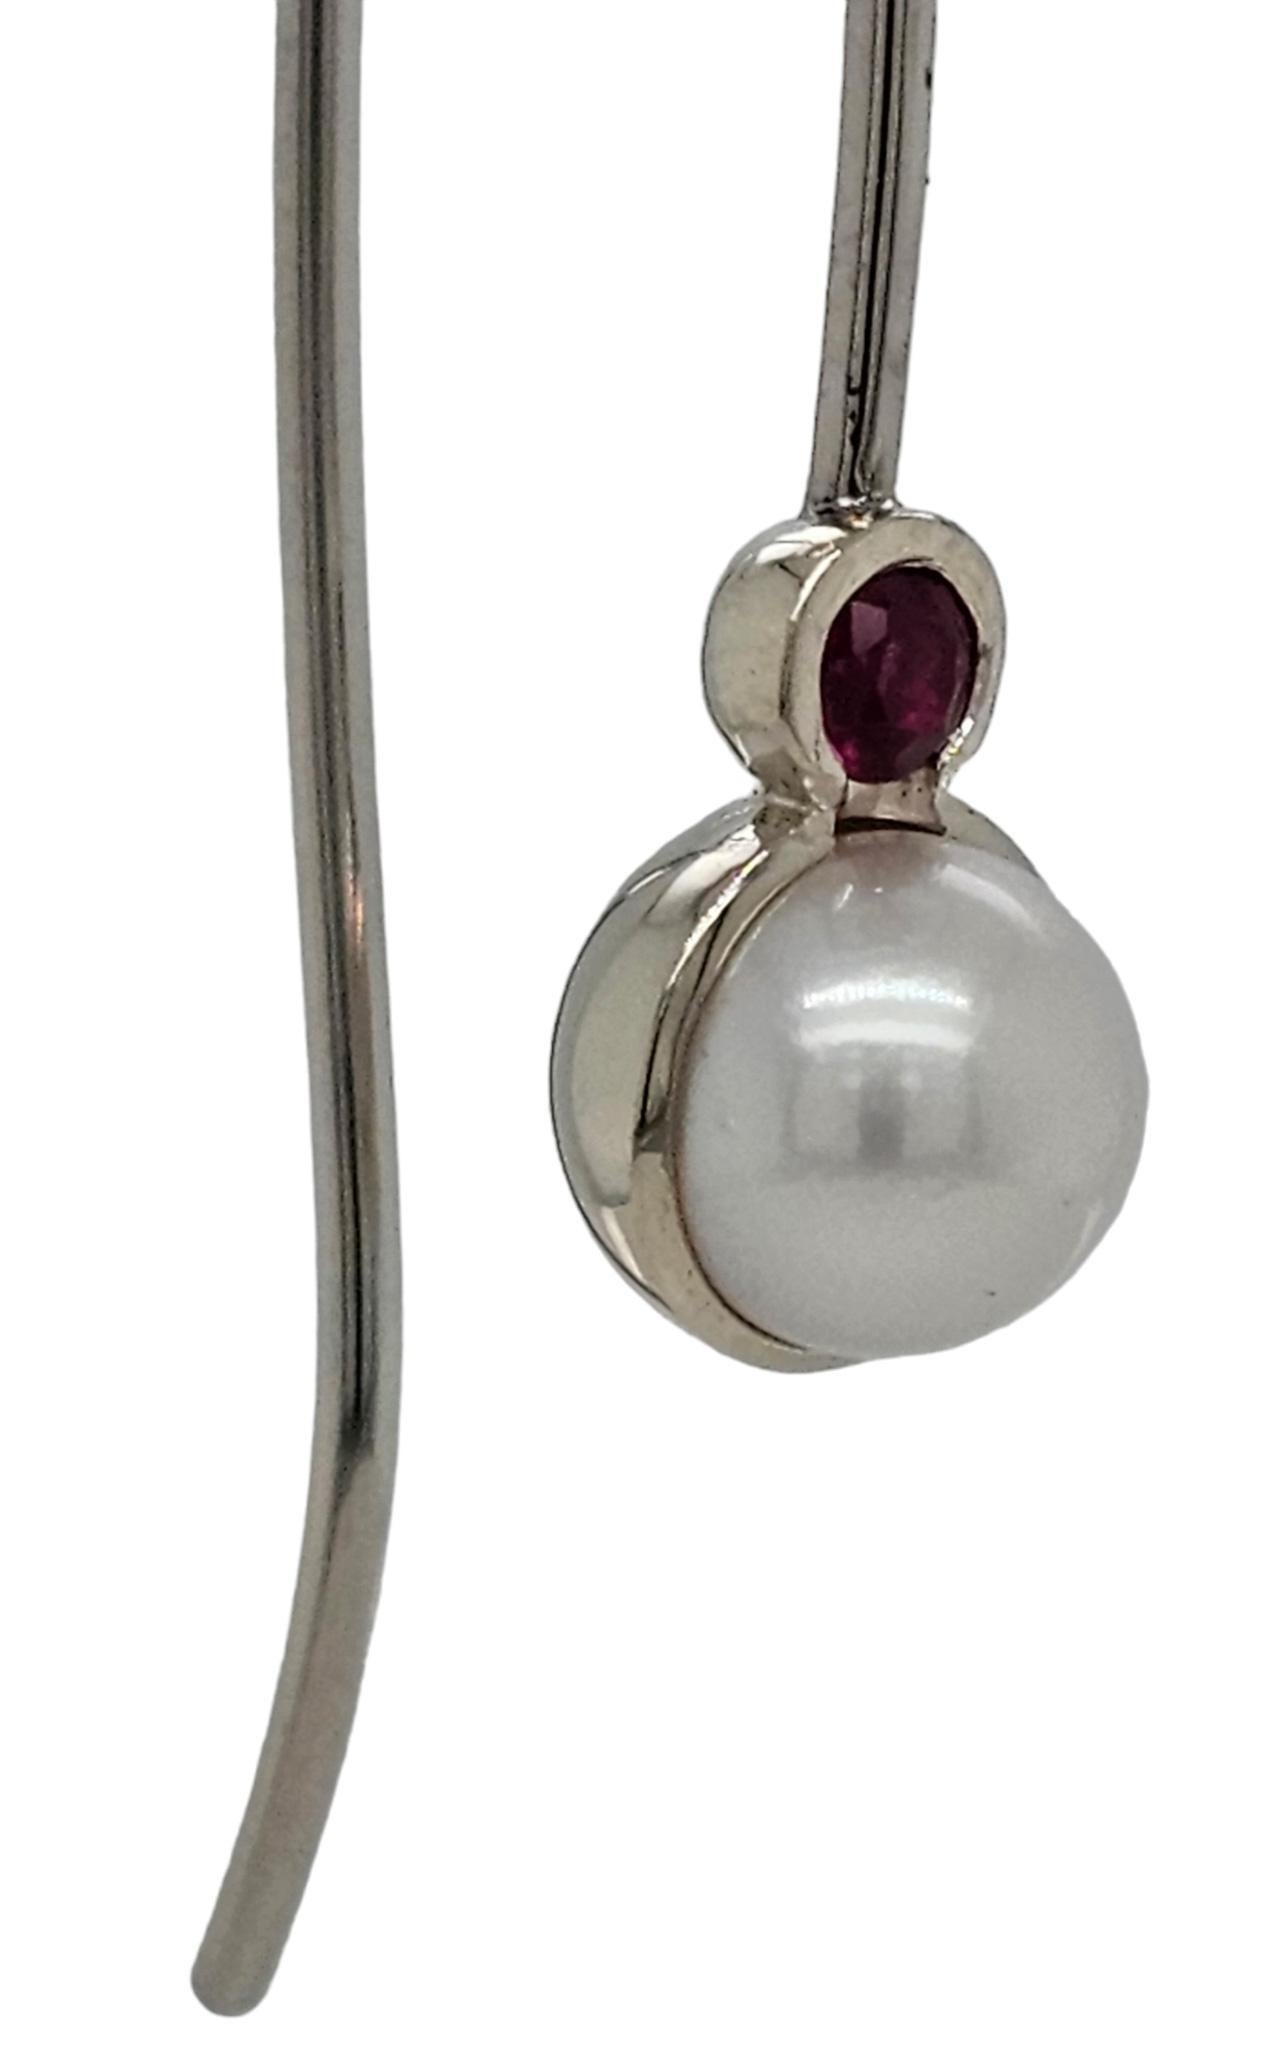  18ct White Gold & Pearl Earrings Featuring Rubies 